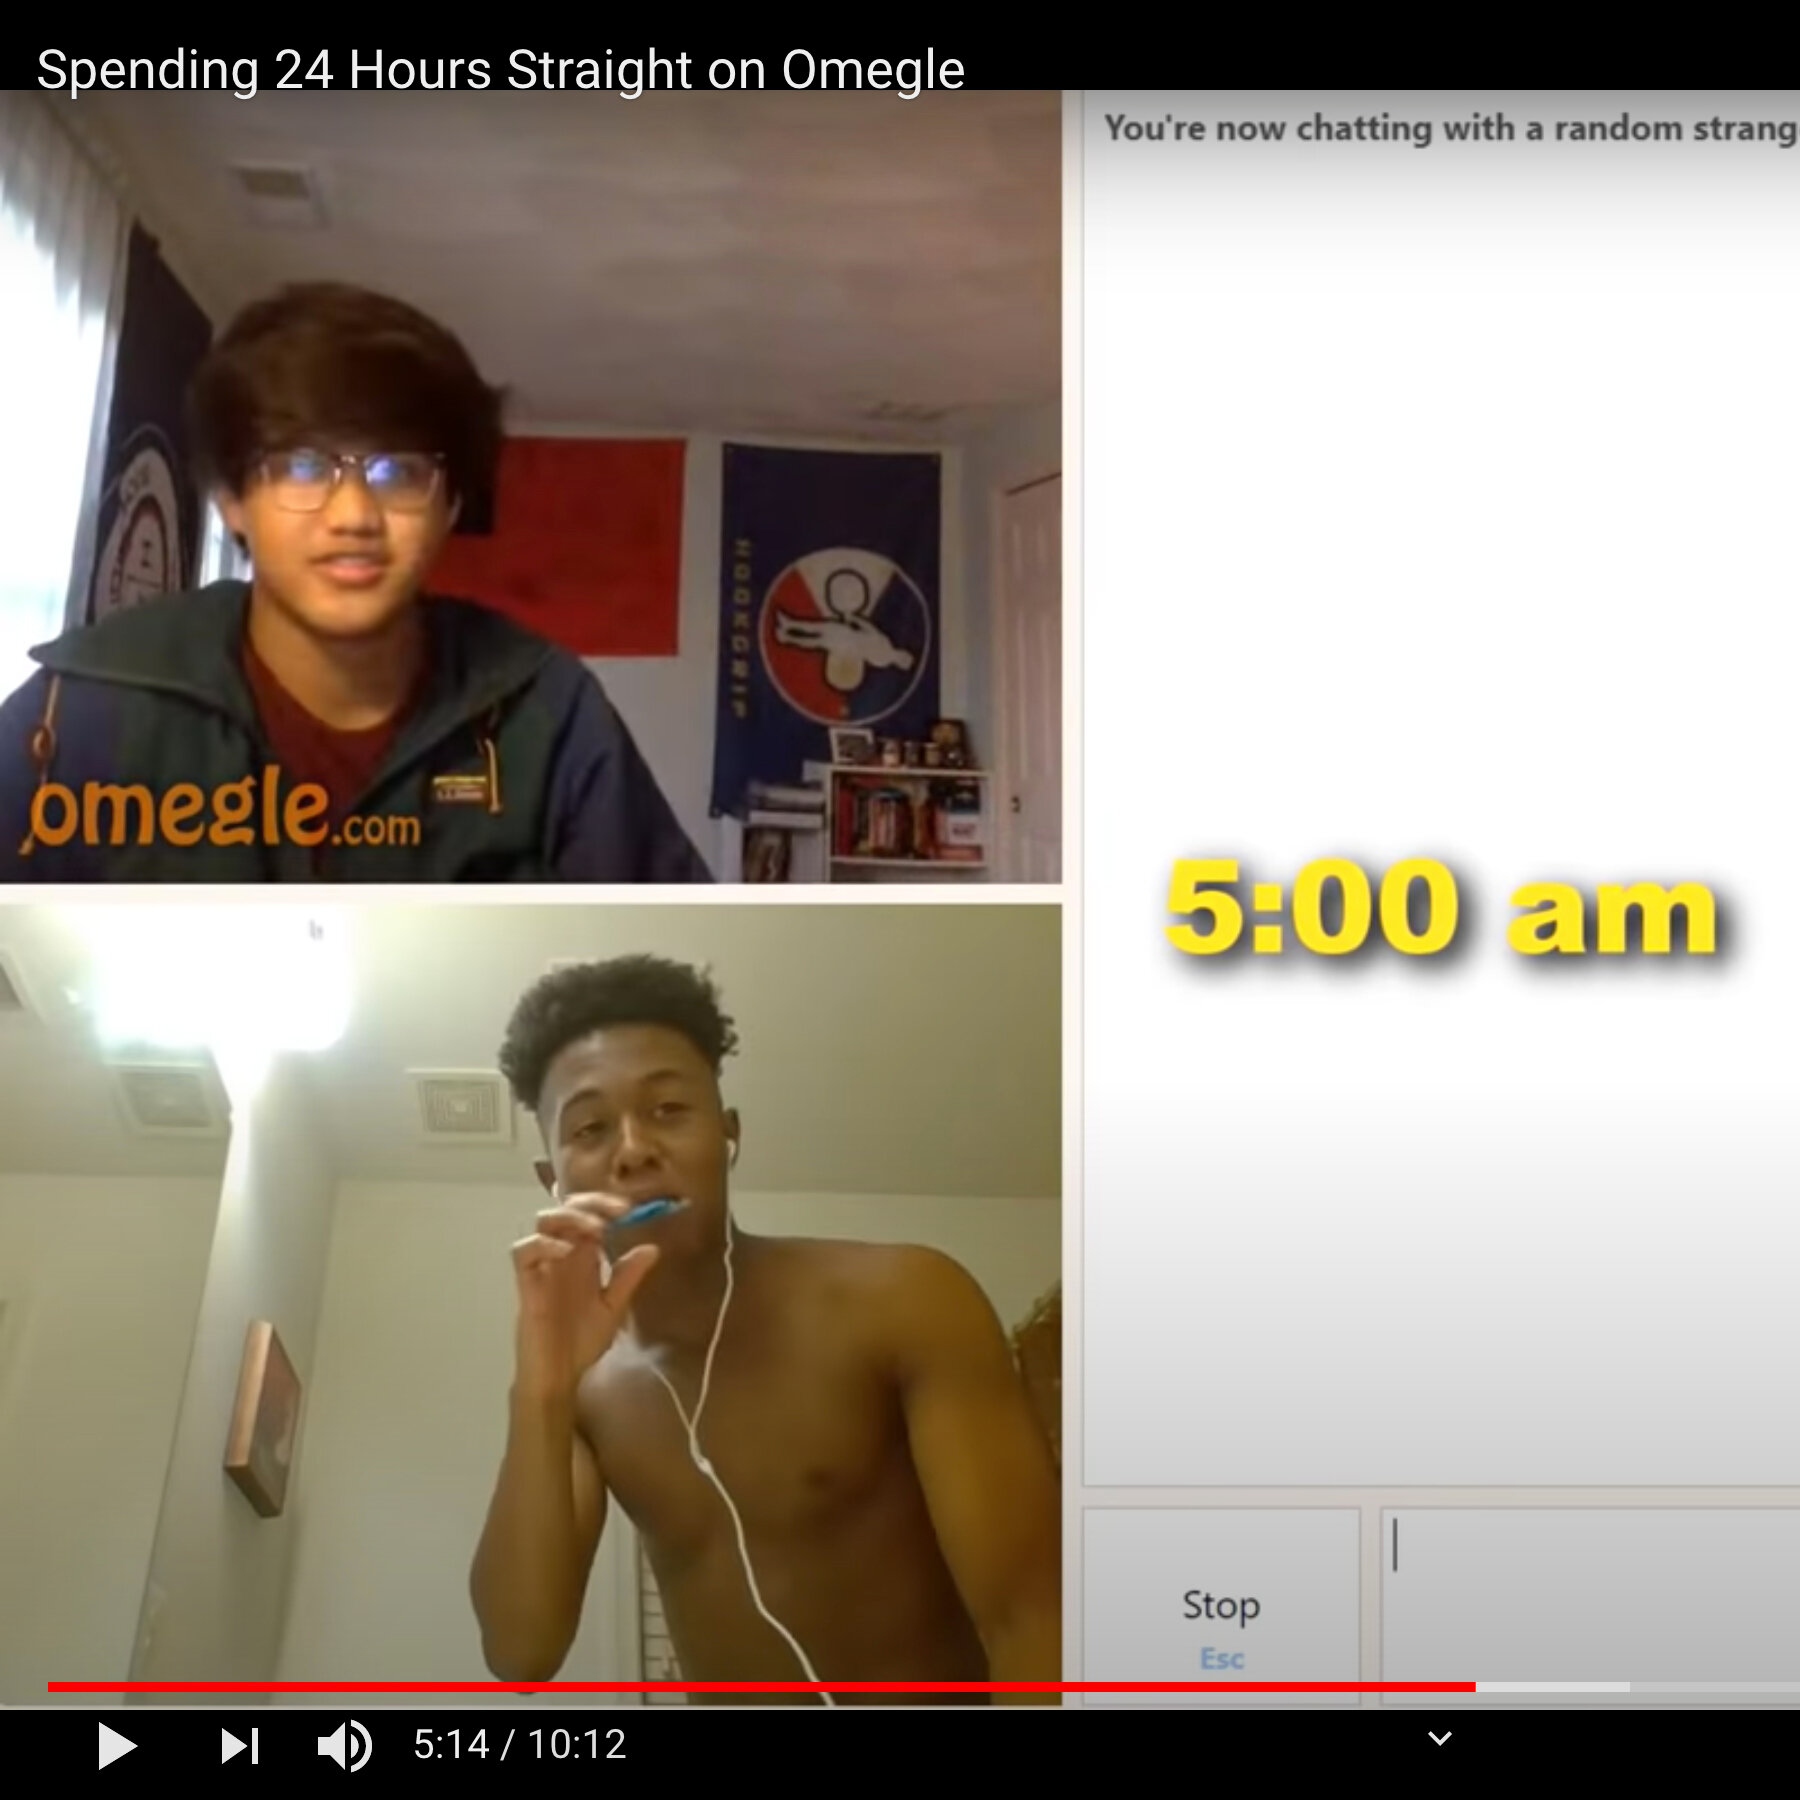 arnel demarucut recommends naked people on omegle pic